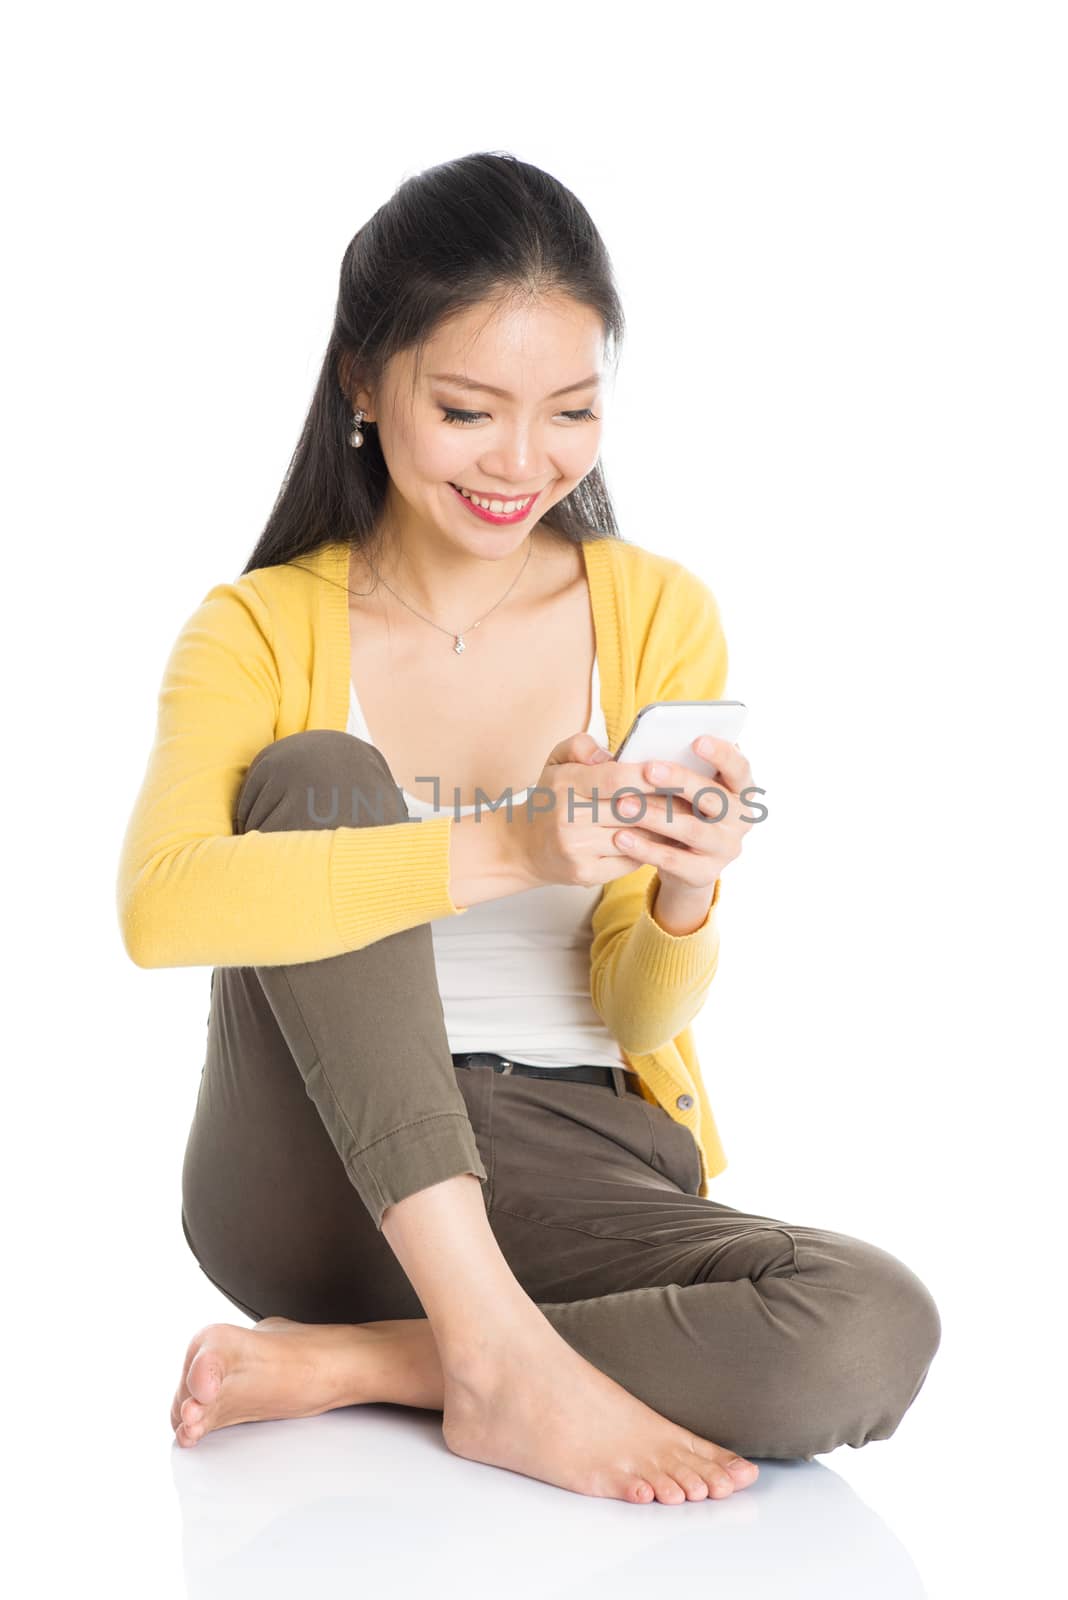 Full length casual Asian girl sitting on floor smiling and using smartphone, isolated on white background.